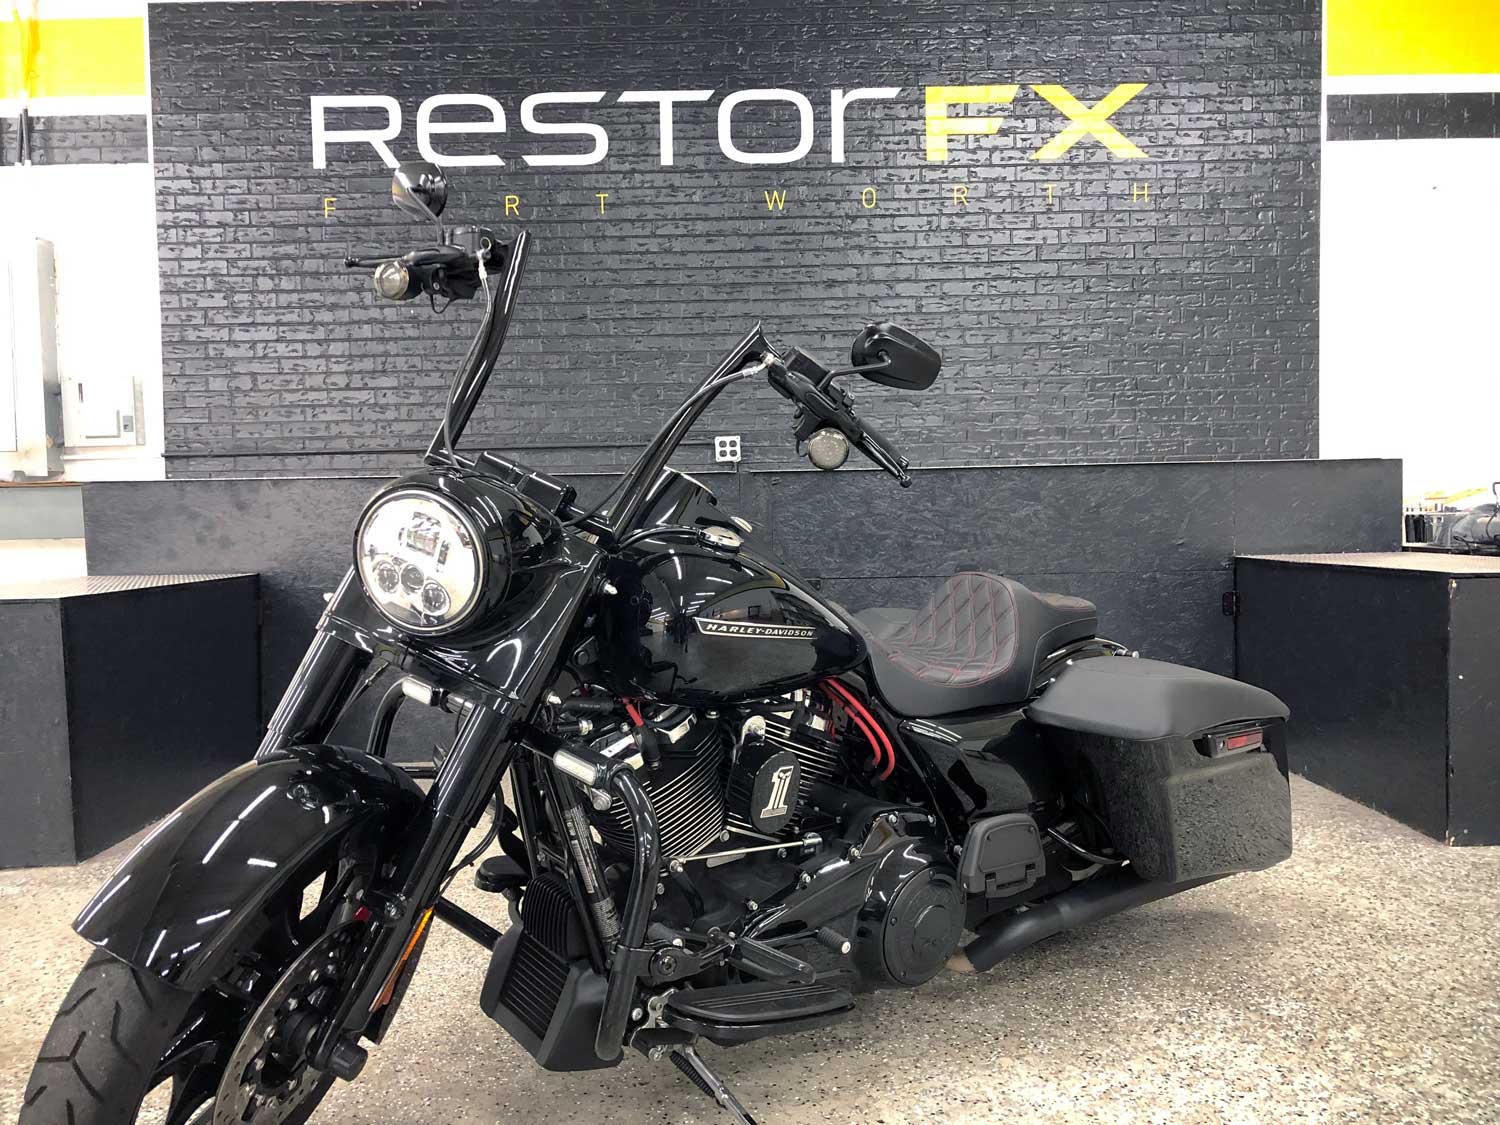 RestorFX Fort Worth interior feature wall with a brick wall treatment and a lustrous, shiny black Harley Davidson motorcycle